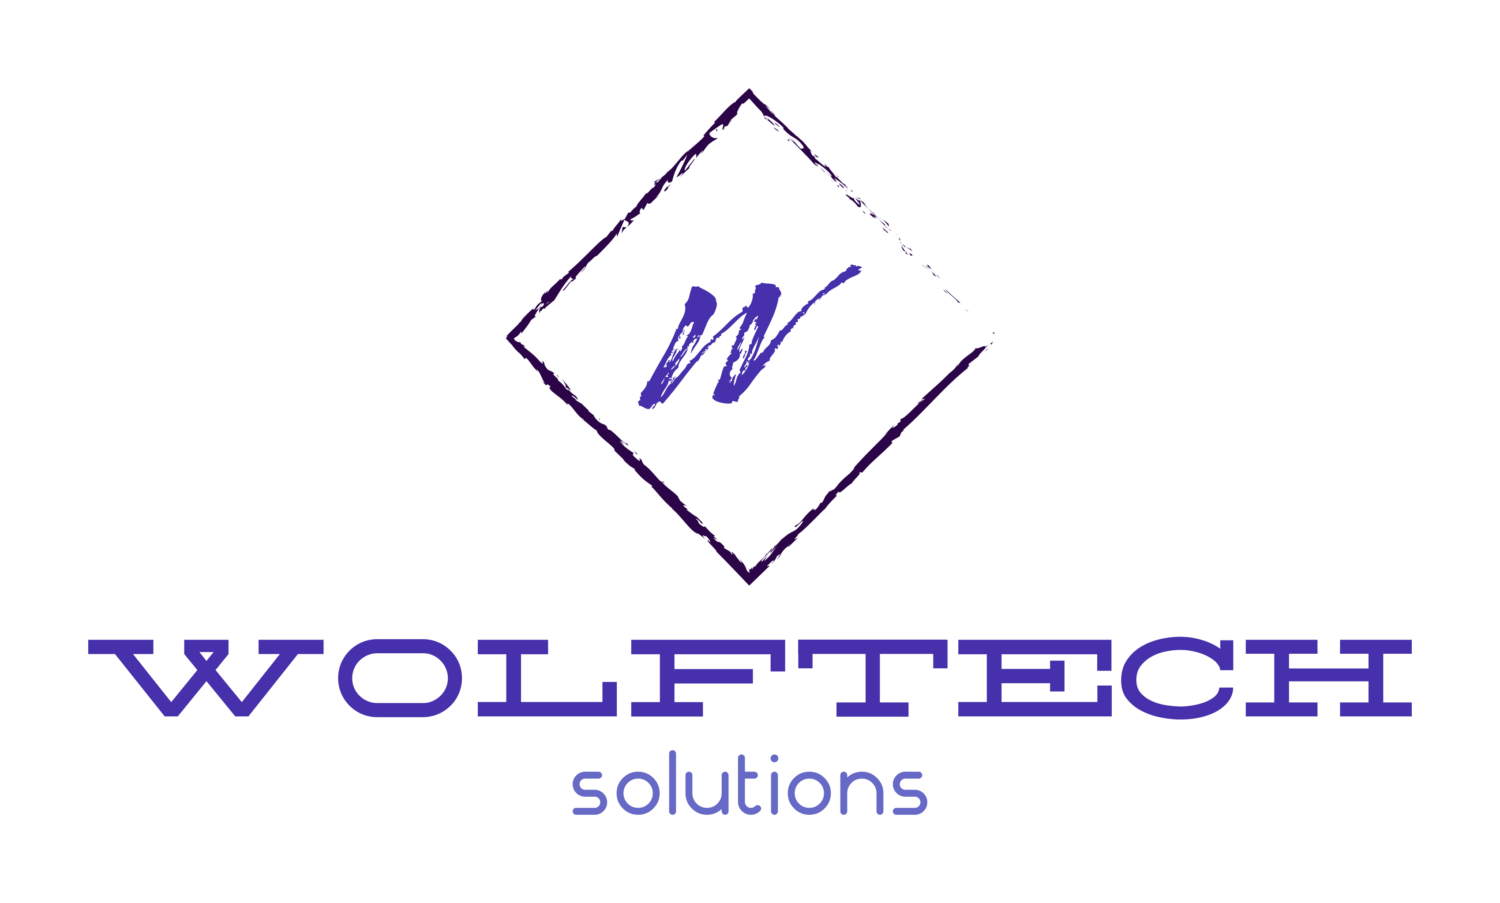 Logo wolftech.solutions